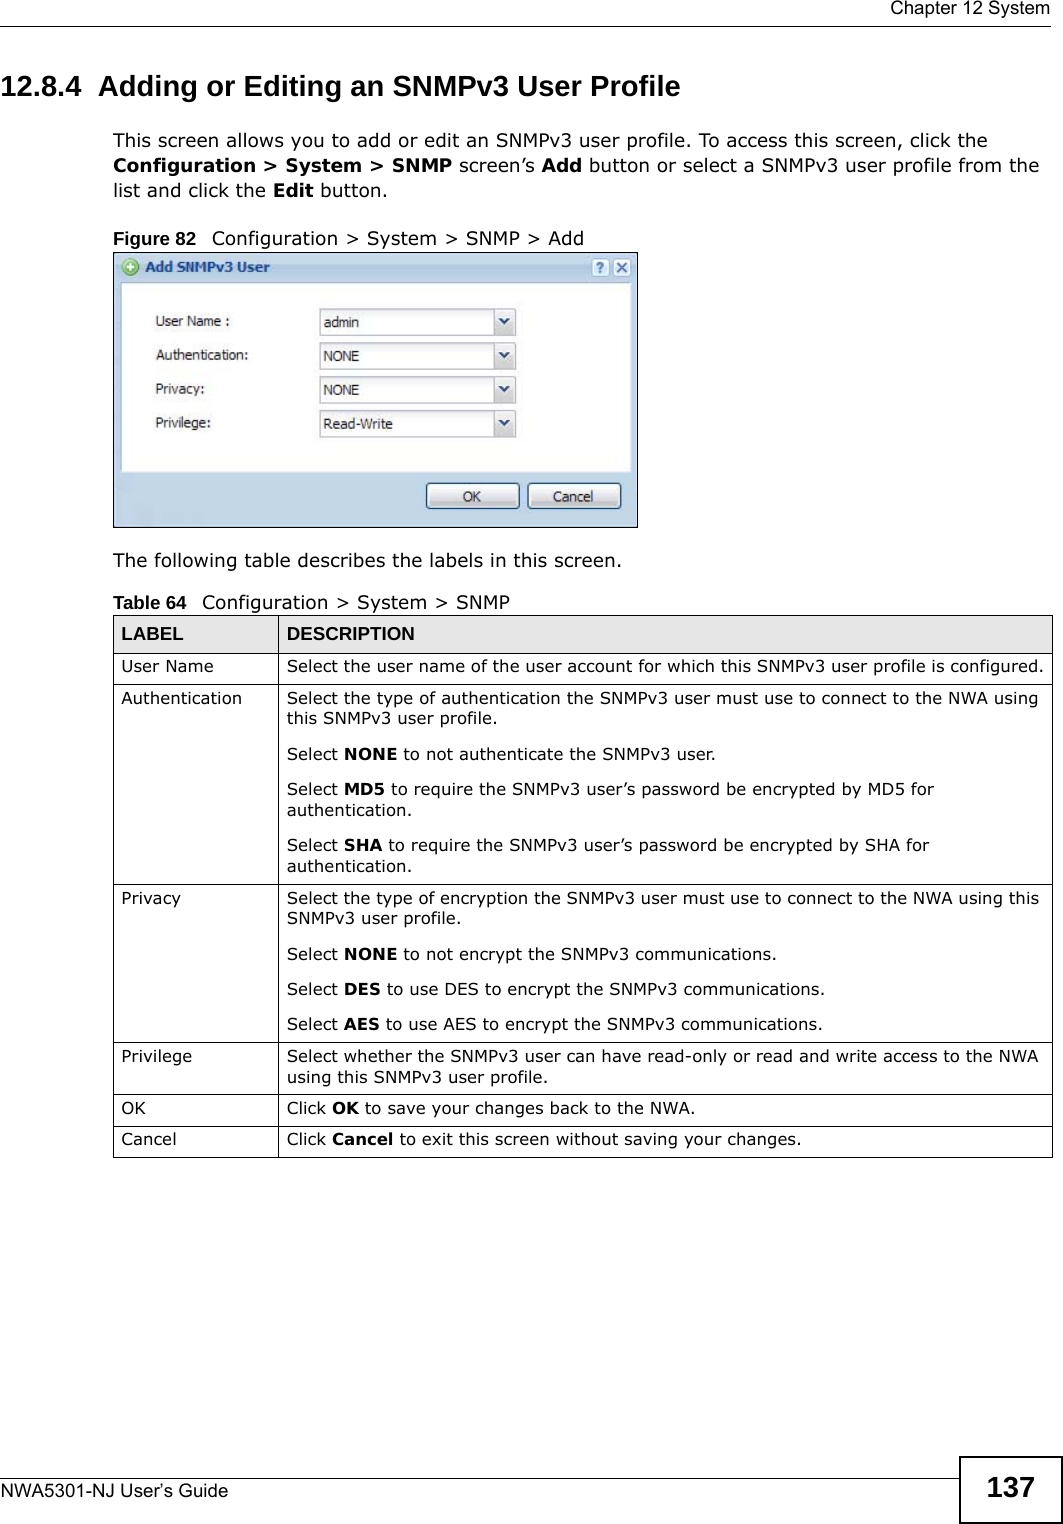  Chapter 12 SystemNWA5301-NJ User’s Guide 13712.8.4  Adding or Editing an SNMPv3 User ProfileThis screen allows you to add or edit an SNMPv3 user profile. To access this screen, click the Configuration &gt; System &gt; SNMP screen’s Add button or select a SNMPv3 user profile from the list and click the Edit button.Figure 82   Configuration &gt; System &gt; SNMP &gt; AddThe following table describes the labels in this screen.  Table 64   Configuration &gt; System &gt; SNMPLABEL DESCRIPTIONUser Name Select the user name of the user account for which this SNMPv3 user profile is configured.Authentication Select the type of authentication the SNMPv3 user must use to connect to the NWA using this SNMPv3 user profile.Select NONE to not authenticate the SNMPv3 user.Select MD5 to require the SNMPv3 user’s password be encrypted by MD5 for authentication.Select SHA to require the SNMPv3 user’s password be encrypted by SHA for authentication.Privacy Select the type of encryption the SNMPv3 user must use to connect to the NWA using this SNMPv3 user profile.Select NONE to not encrypt the SNMPv3 communications.Select DES to use DES to encrypt the SNMPv3 communications.Select AES to use AES to encrypt the SNMPv3 communications.Privilege Select whether the SNMPv3 user can have read-only or read and write access to the NWA using this SNMPv3 user profile.OK Click OK to save your changes back to the NWA.Cancel Click Cancel to exit this screen without saving your changes.